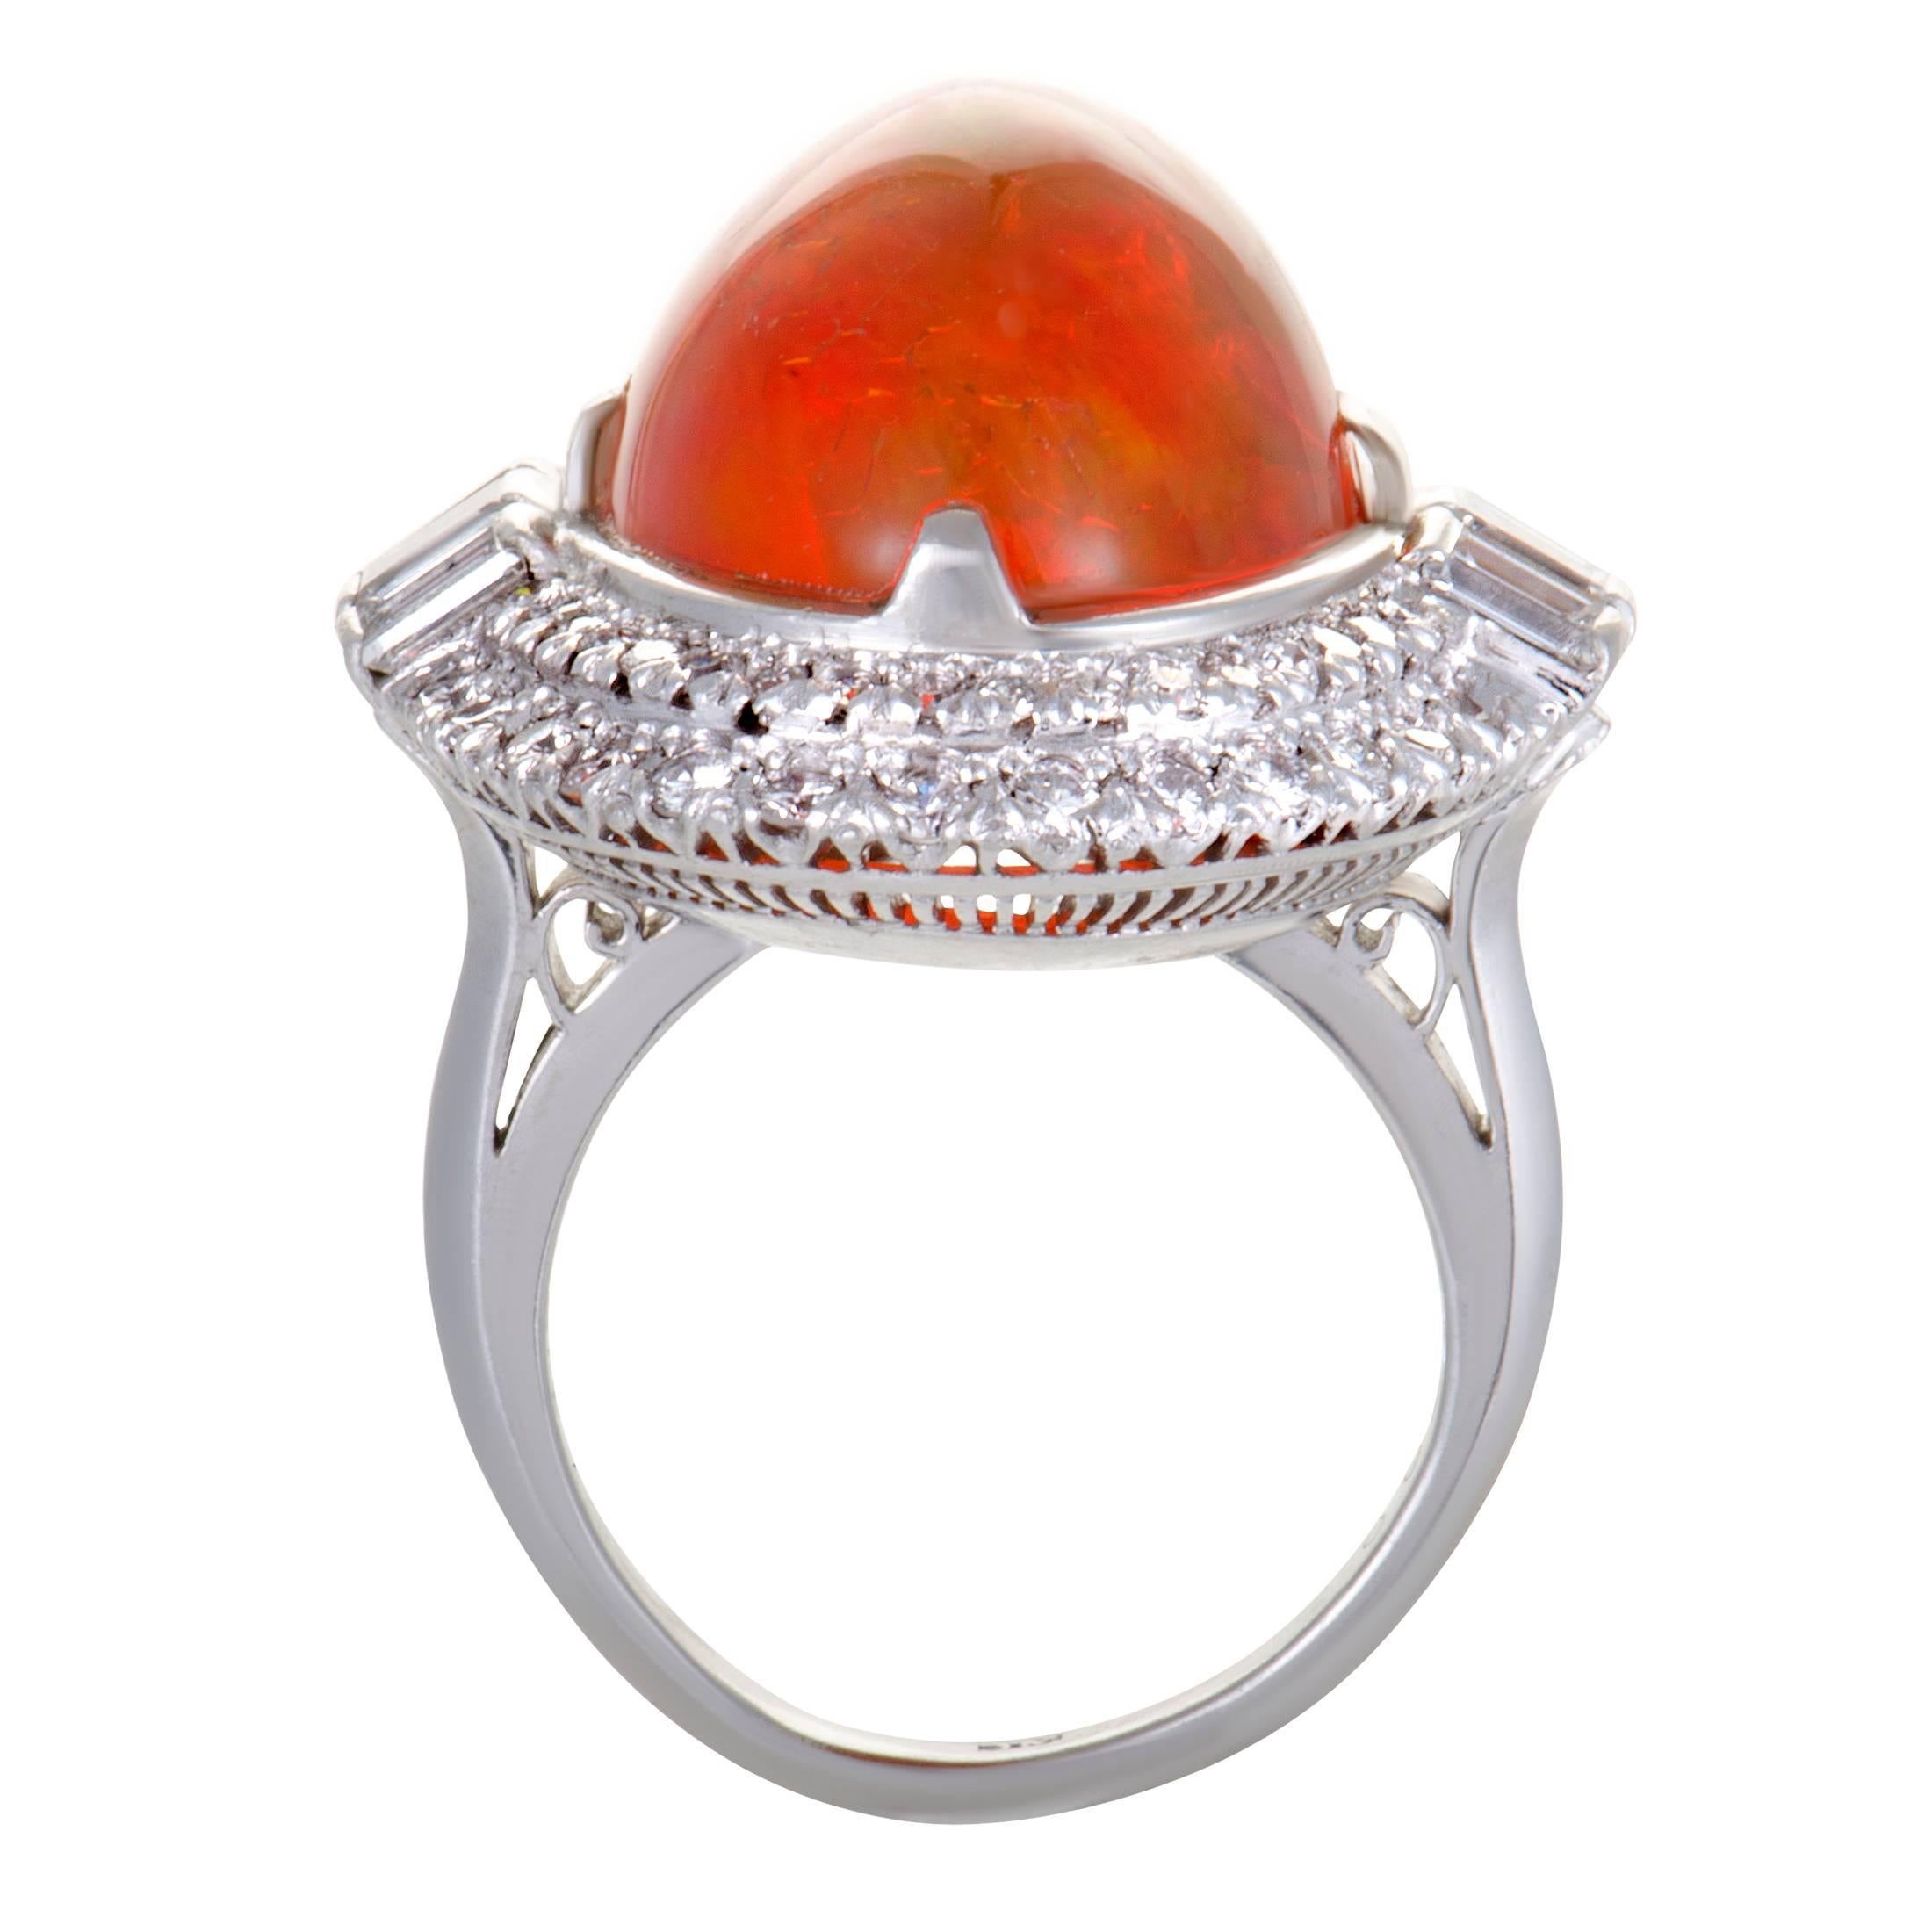 The intriguing fire opal in this ring is surrounded in a spectacular fashion by resplendent diamonds, offering an incredibly luxurious, eye-catching appearance. Made of platinum, the ring boasts a total of 2.07 carats of diamonds, while the opal